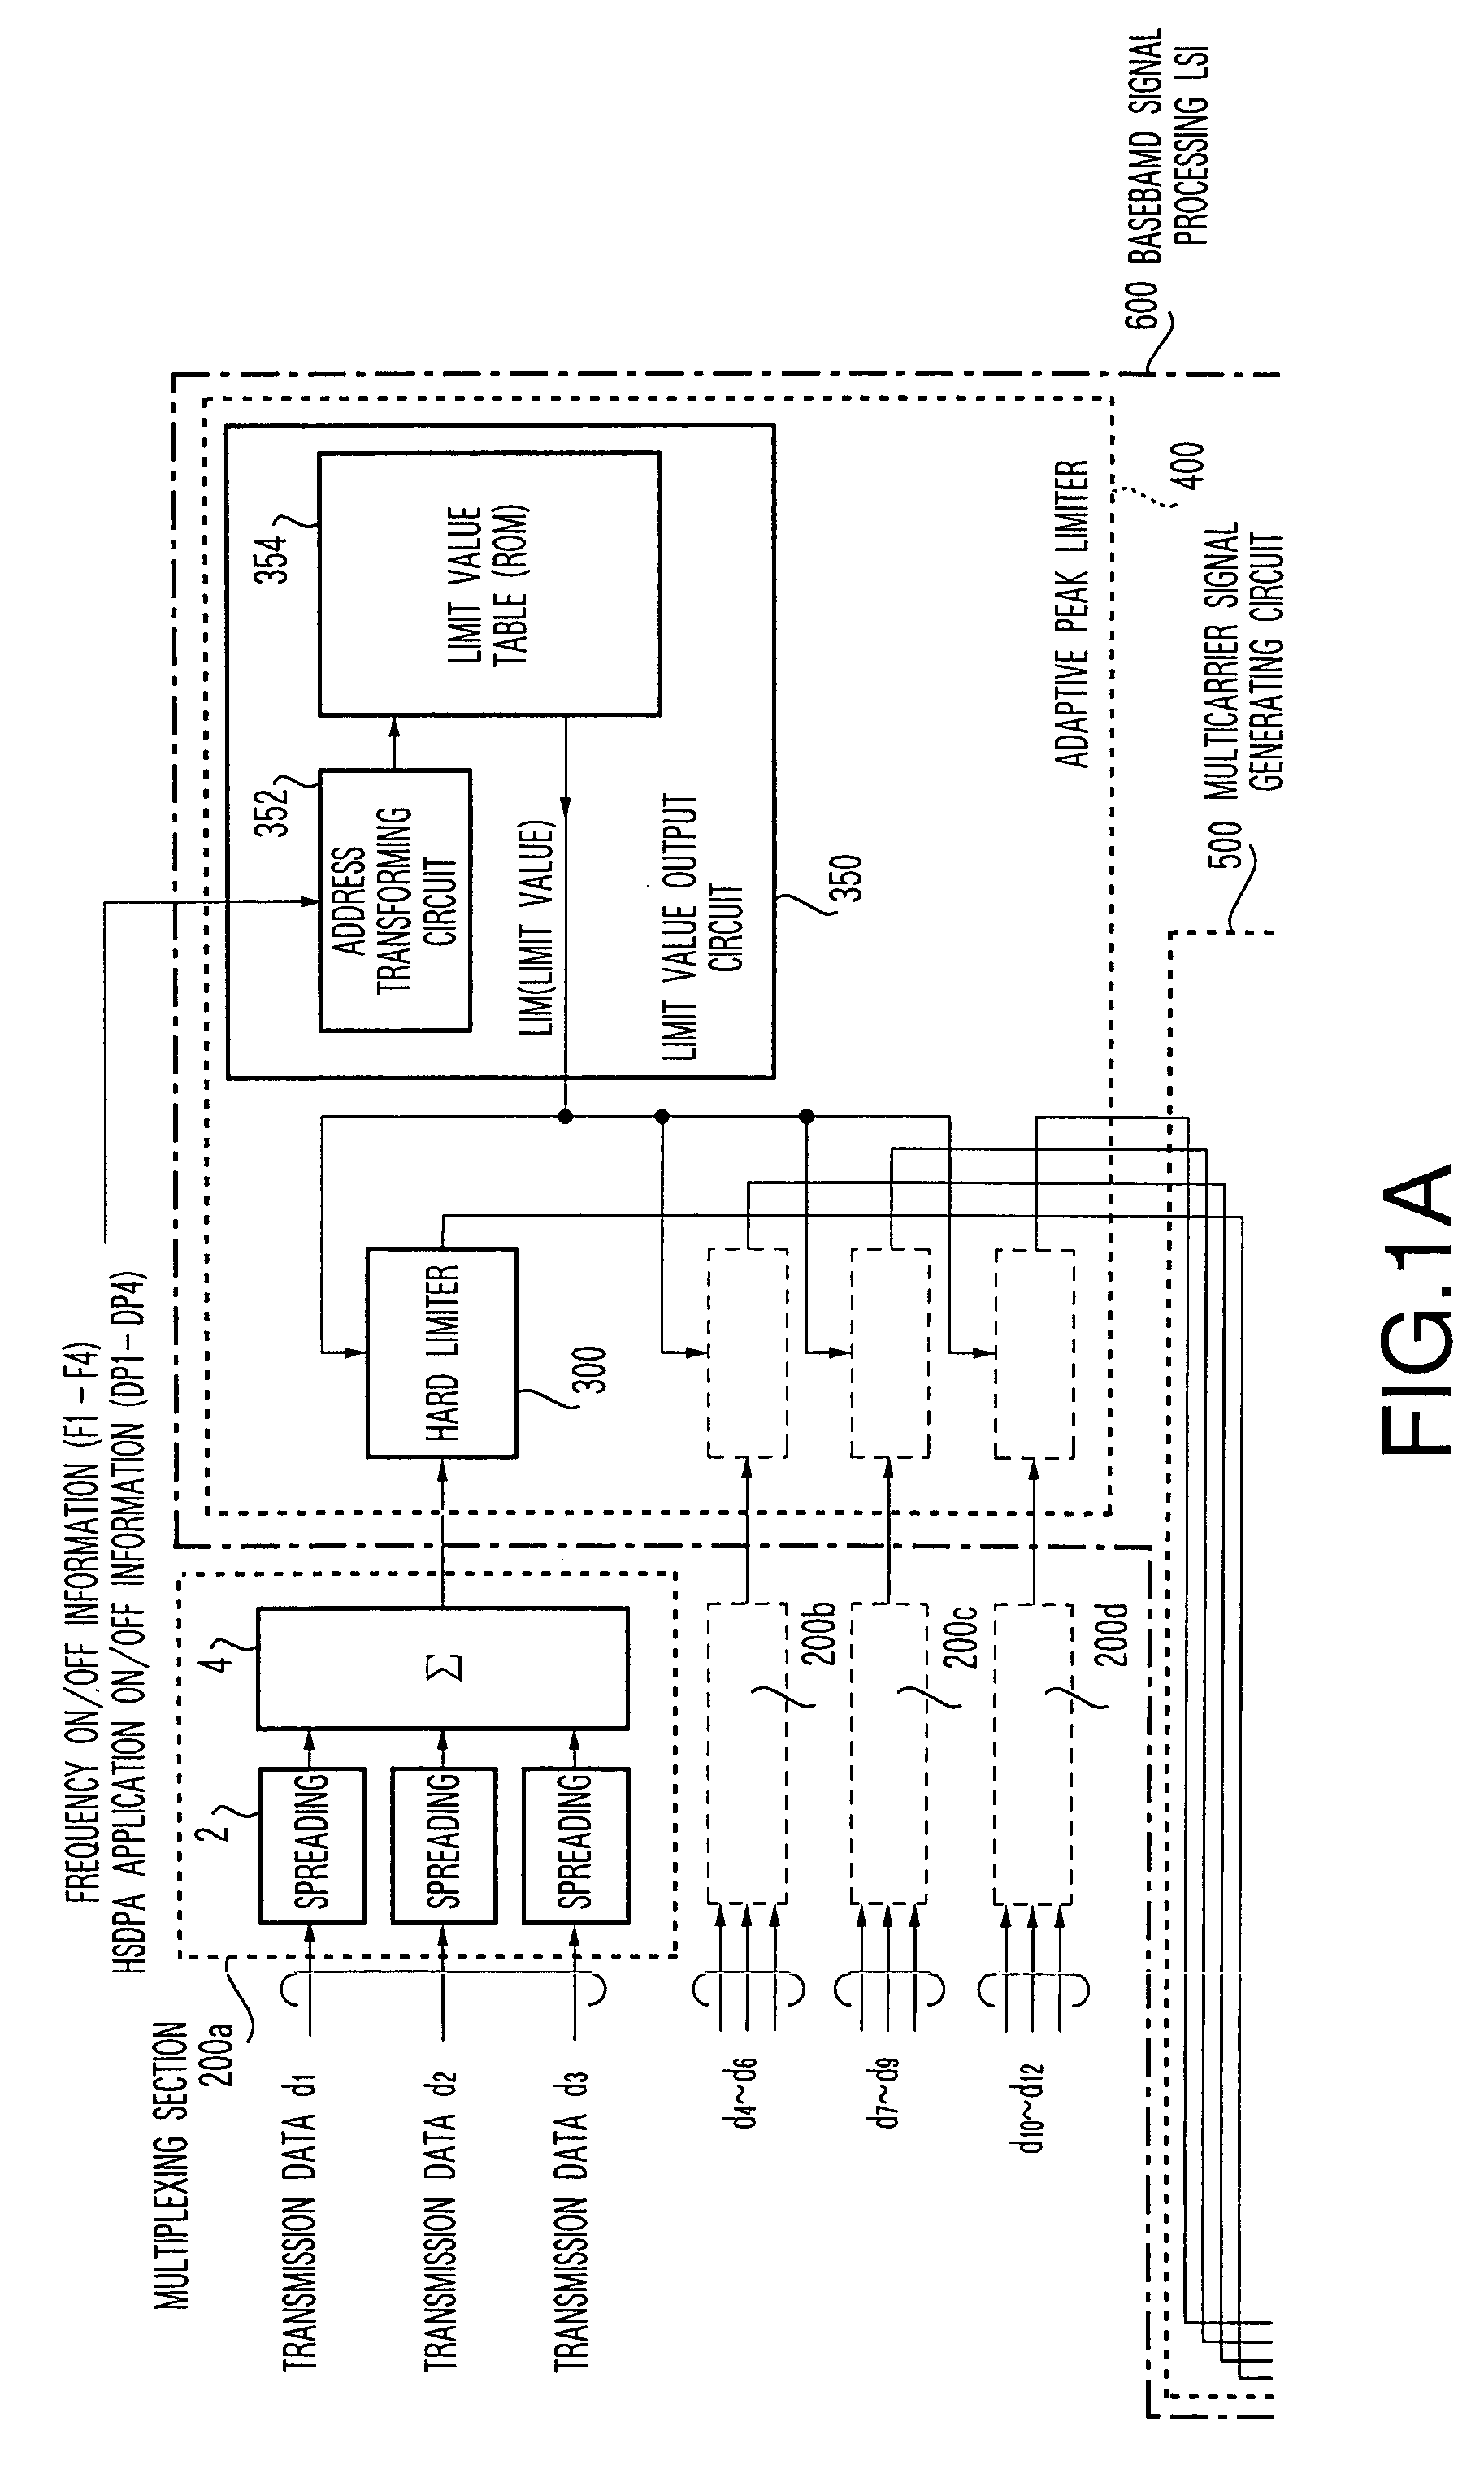 Multicarrier transmission method and apparatus